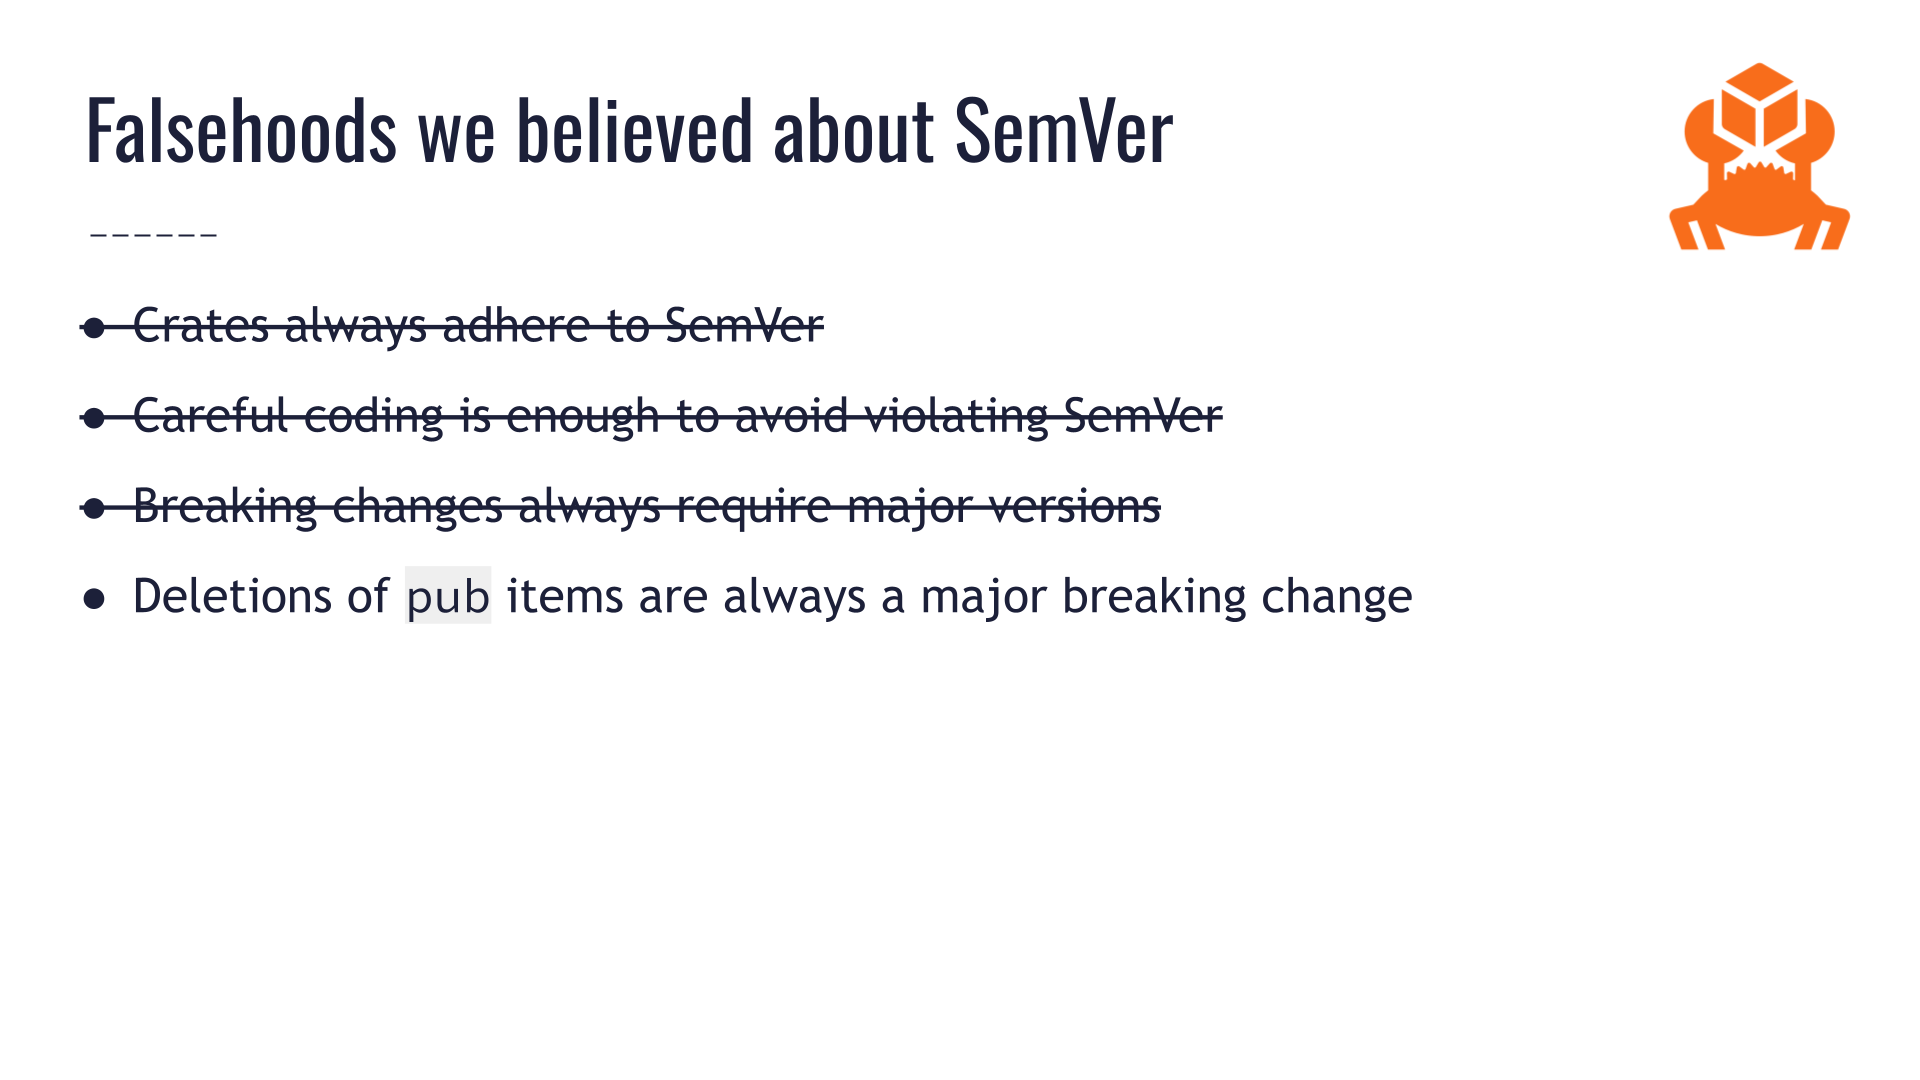 The same slide titled "Falsehoods we believed about SemVer" from earlier. A fourth bullet point says "Deletions of public items are always a major breaking change." The three prior bullet points are crossed off, and there is still plenty of space left for more bullet points.